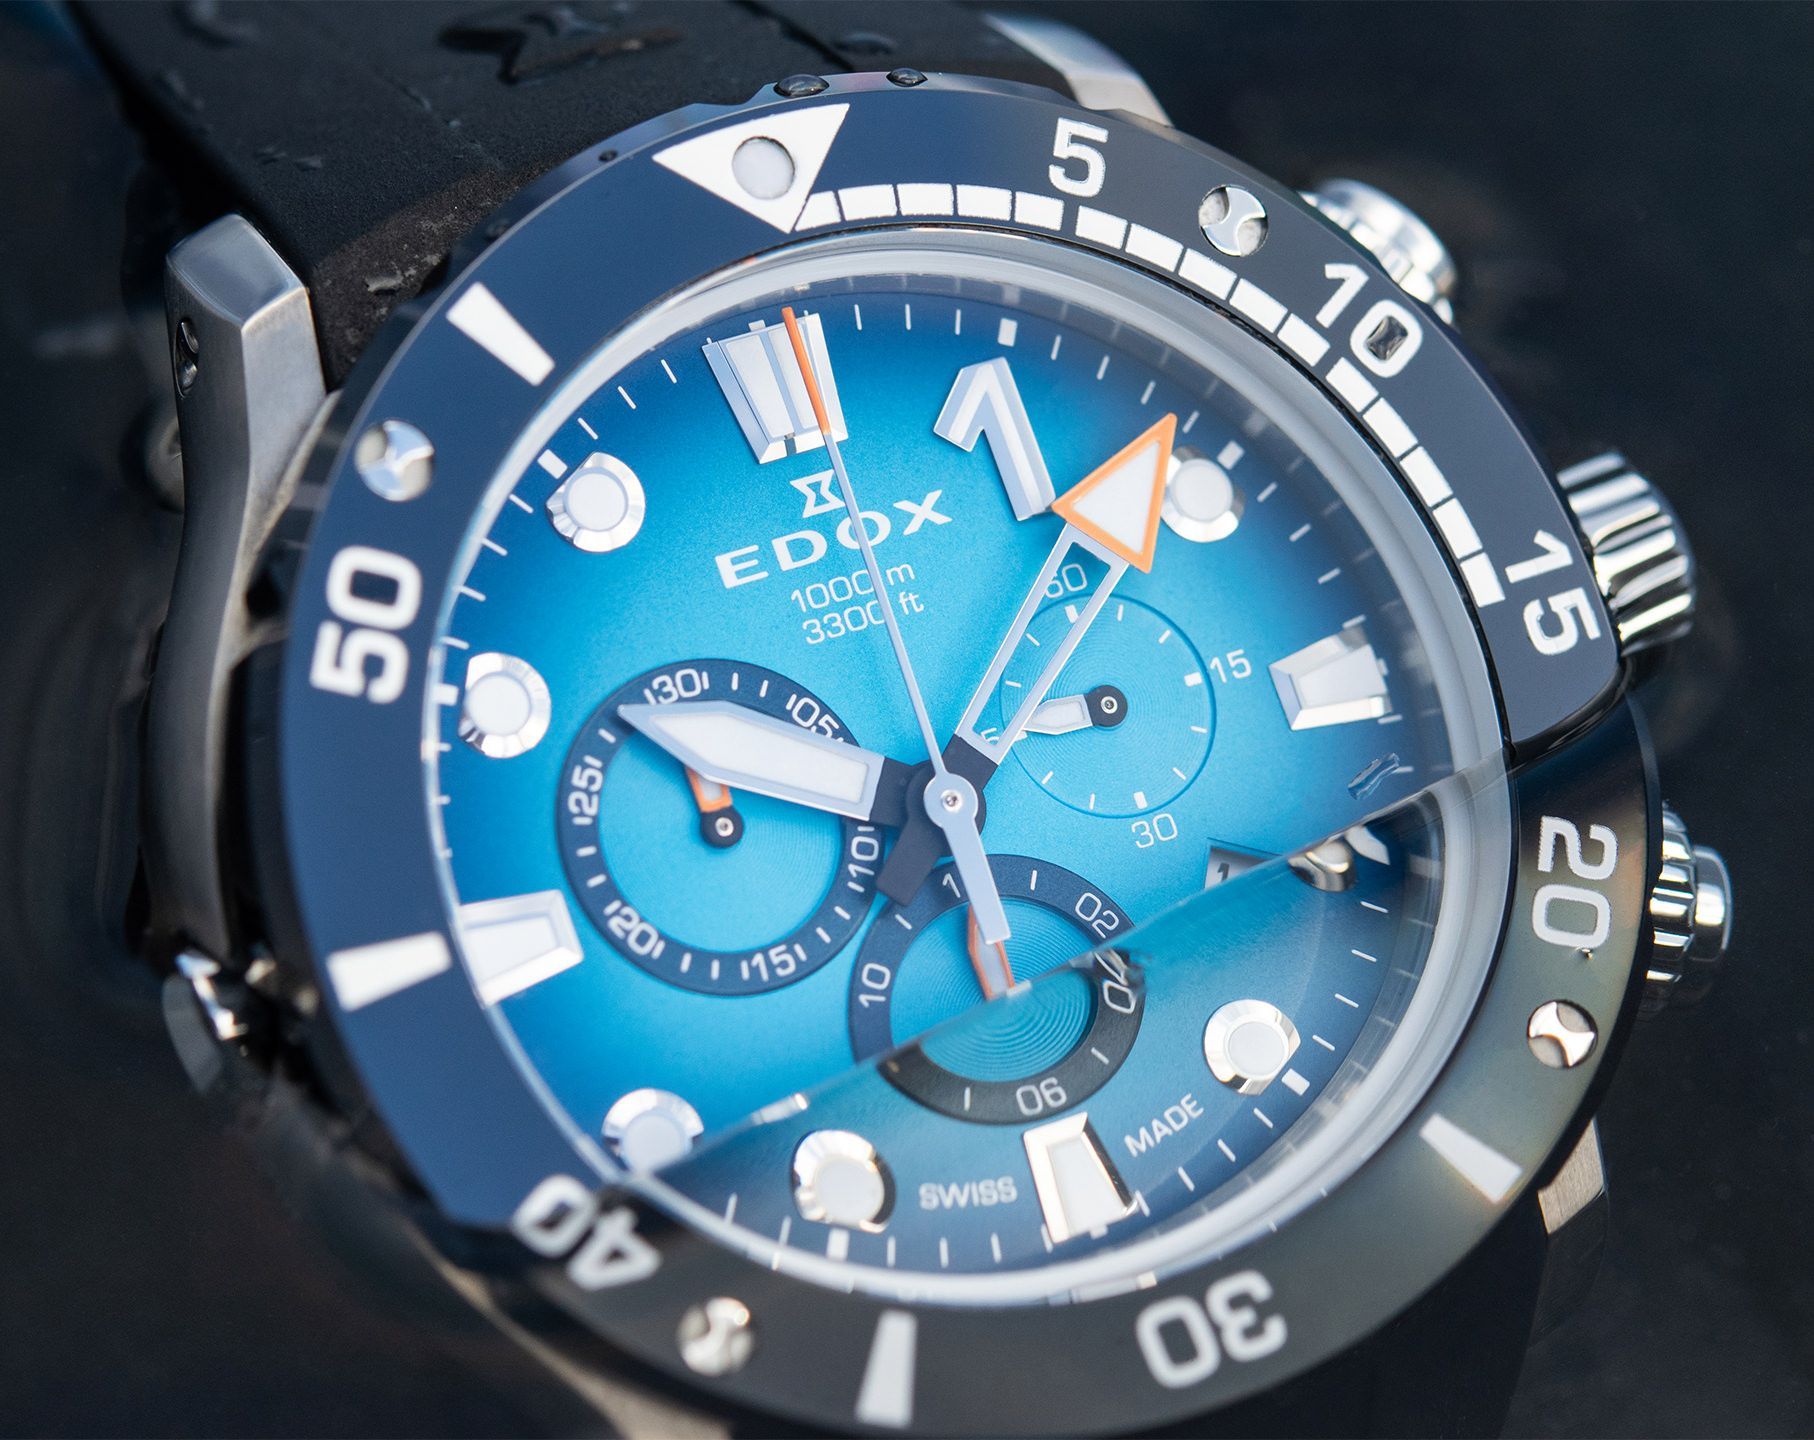 Watch Review: Edox CO-1 Carbon Chronograph